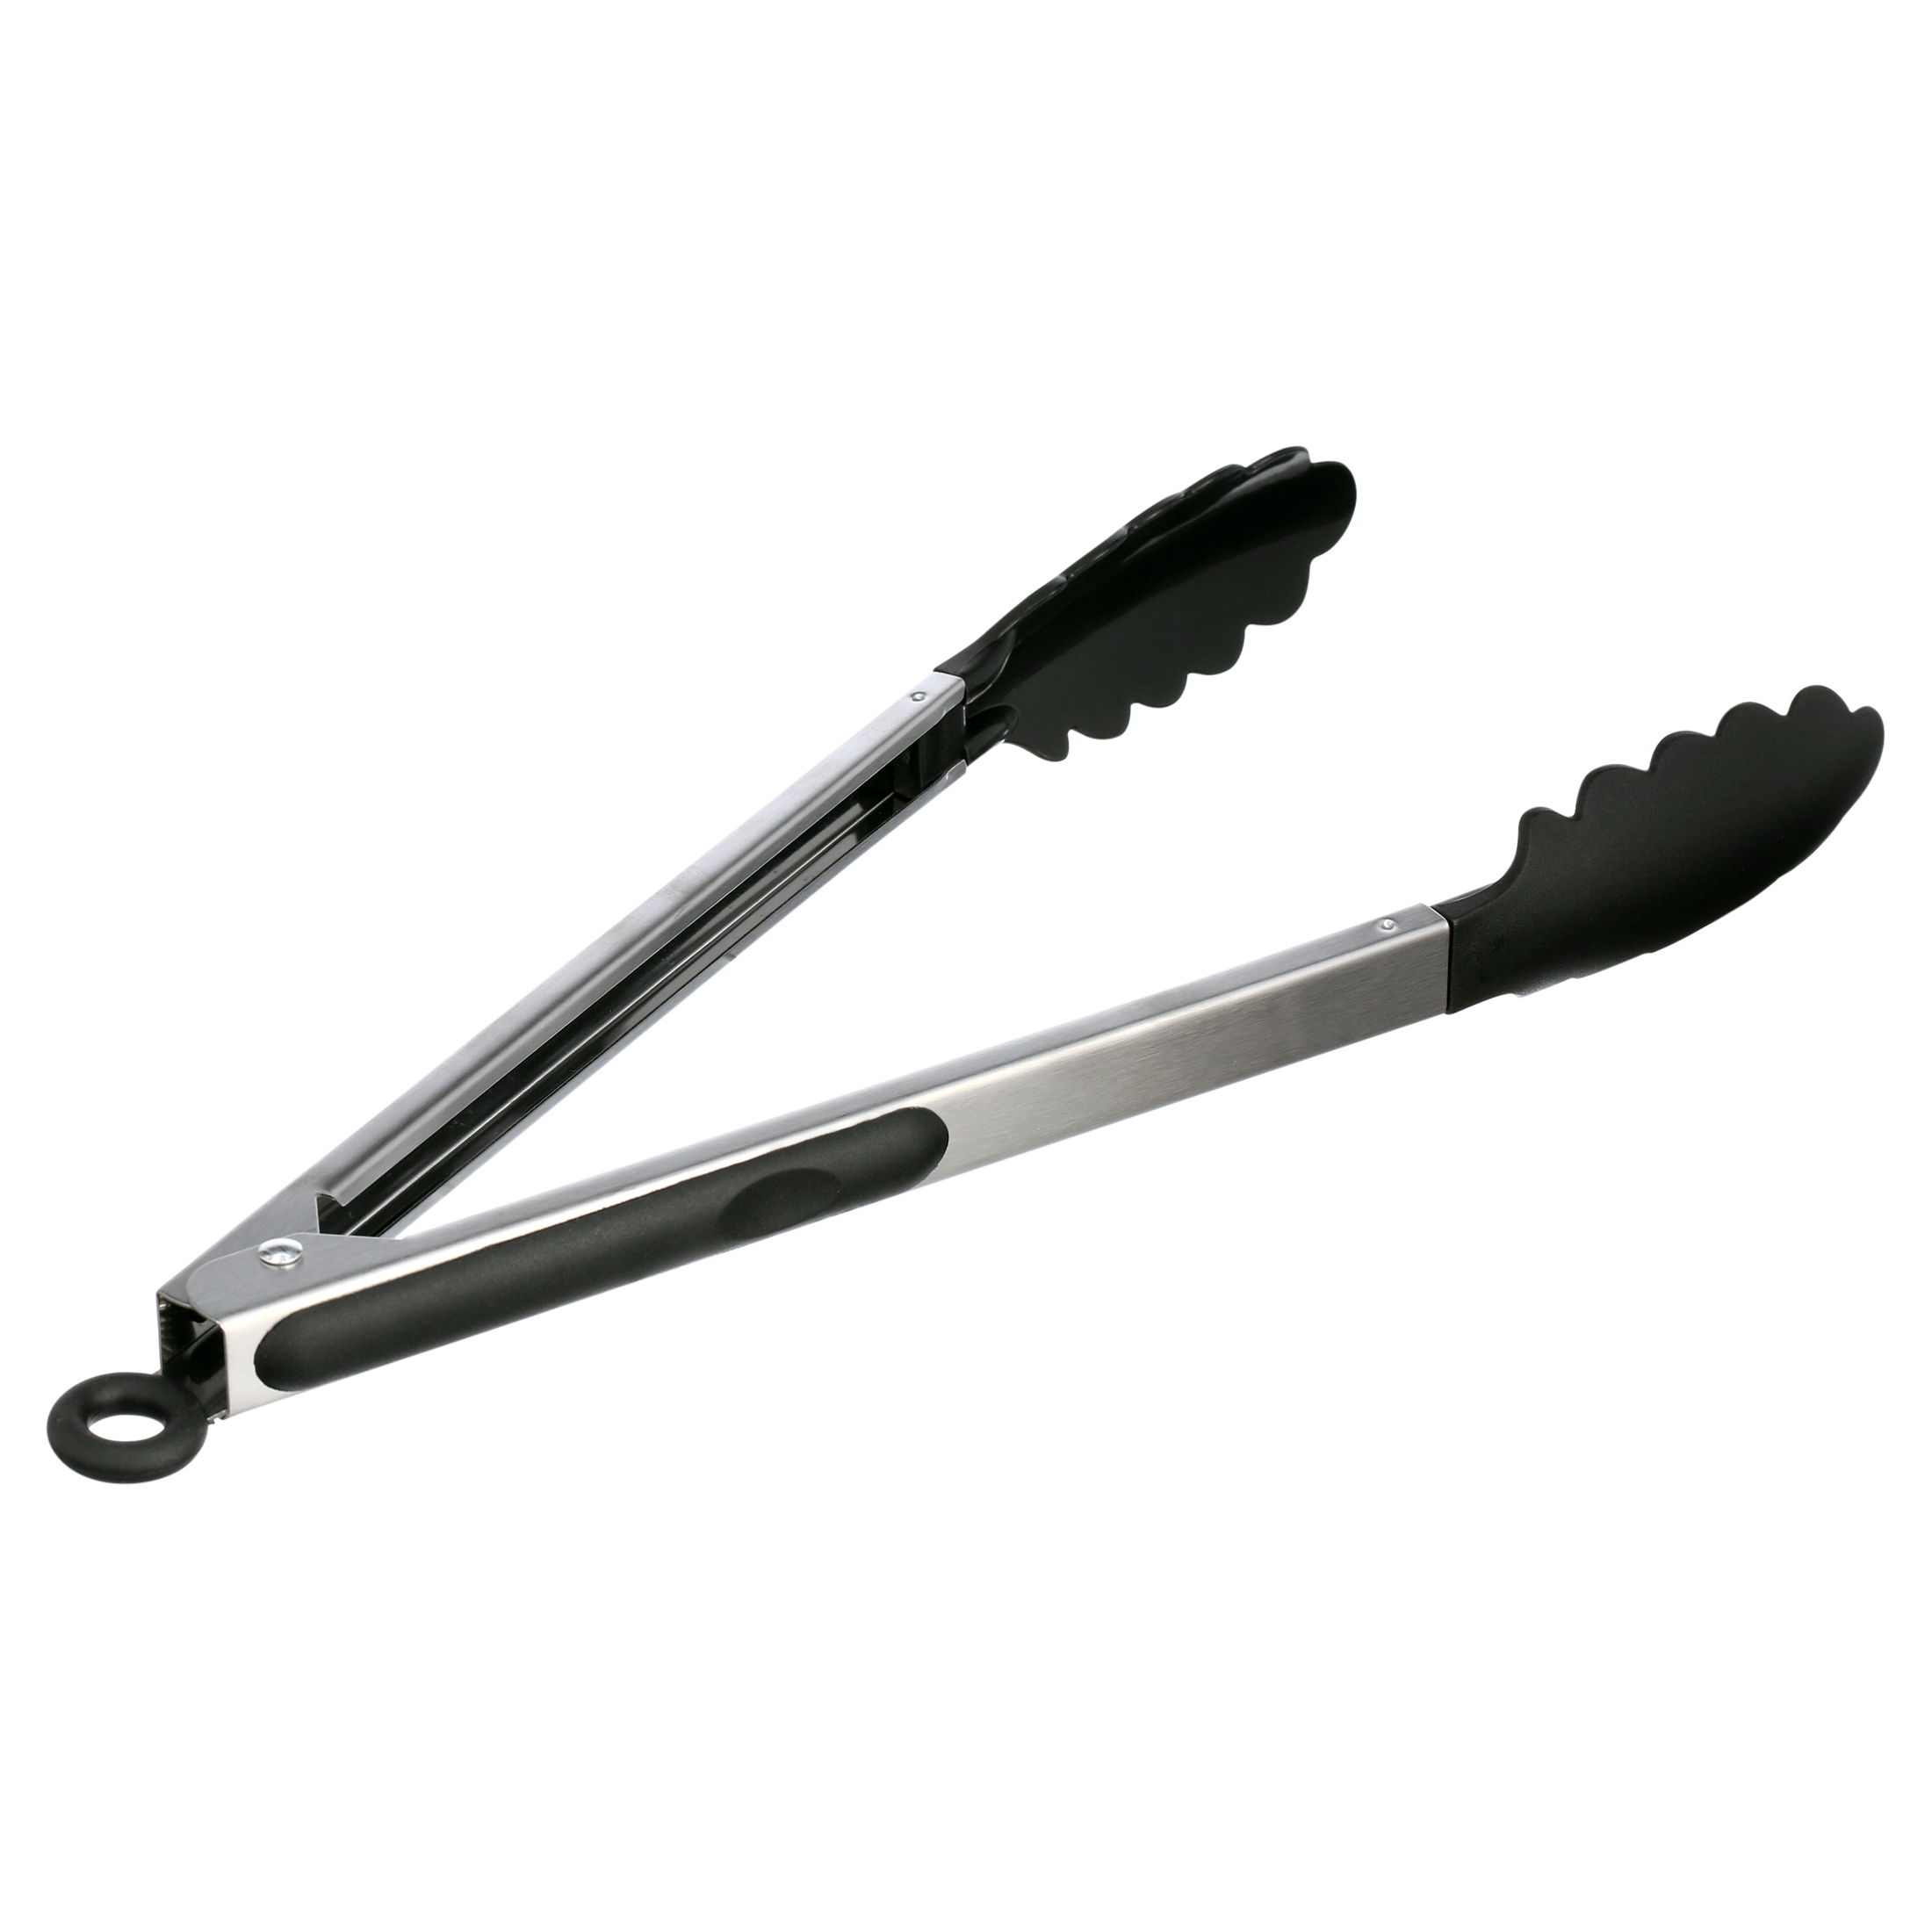 Mainstays Stainless Steel and Black Dripless Tongs - image 2 of 7